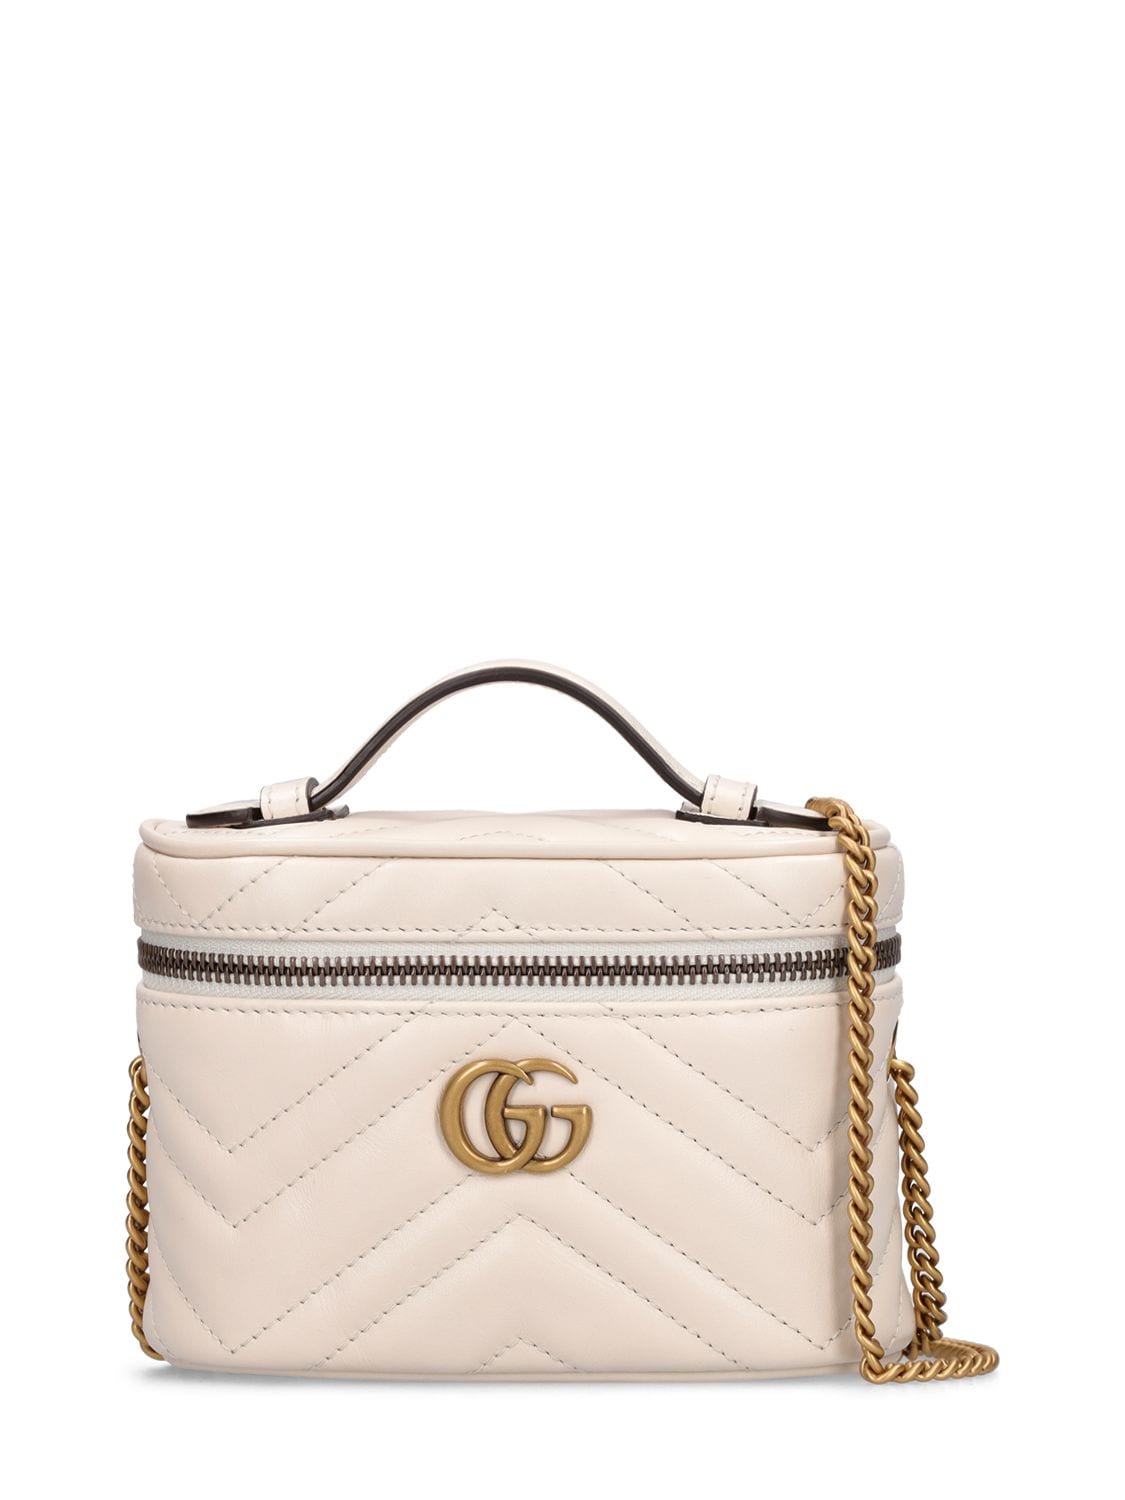 GUCCI Gg Marmont Leather Cosmetic Bag